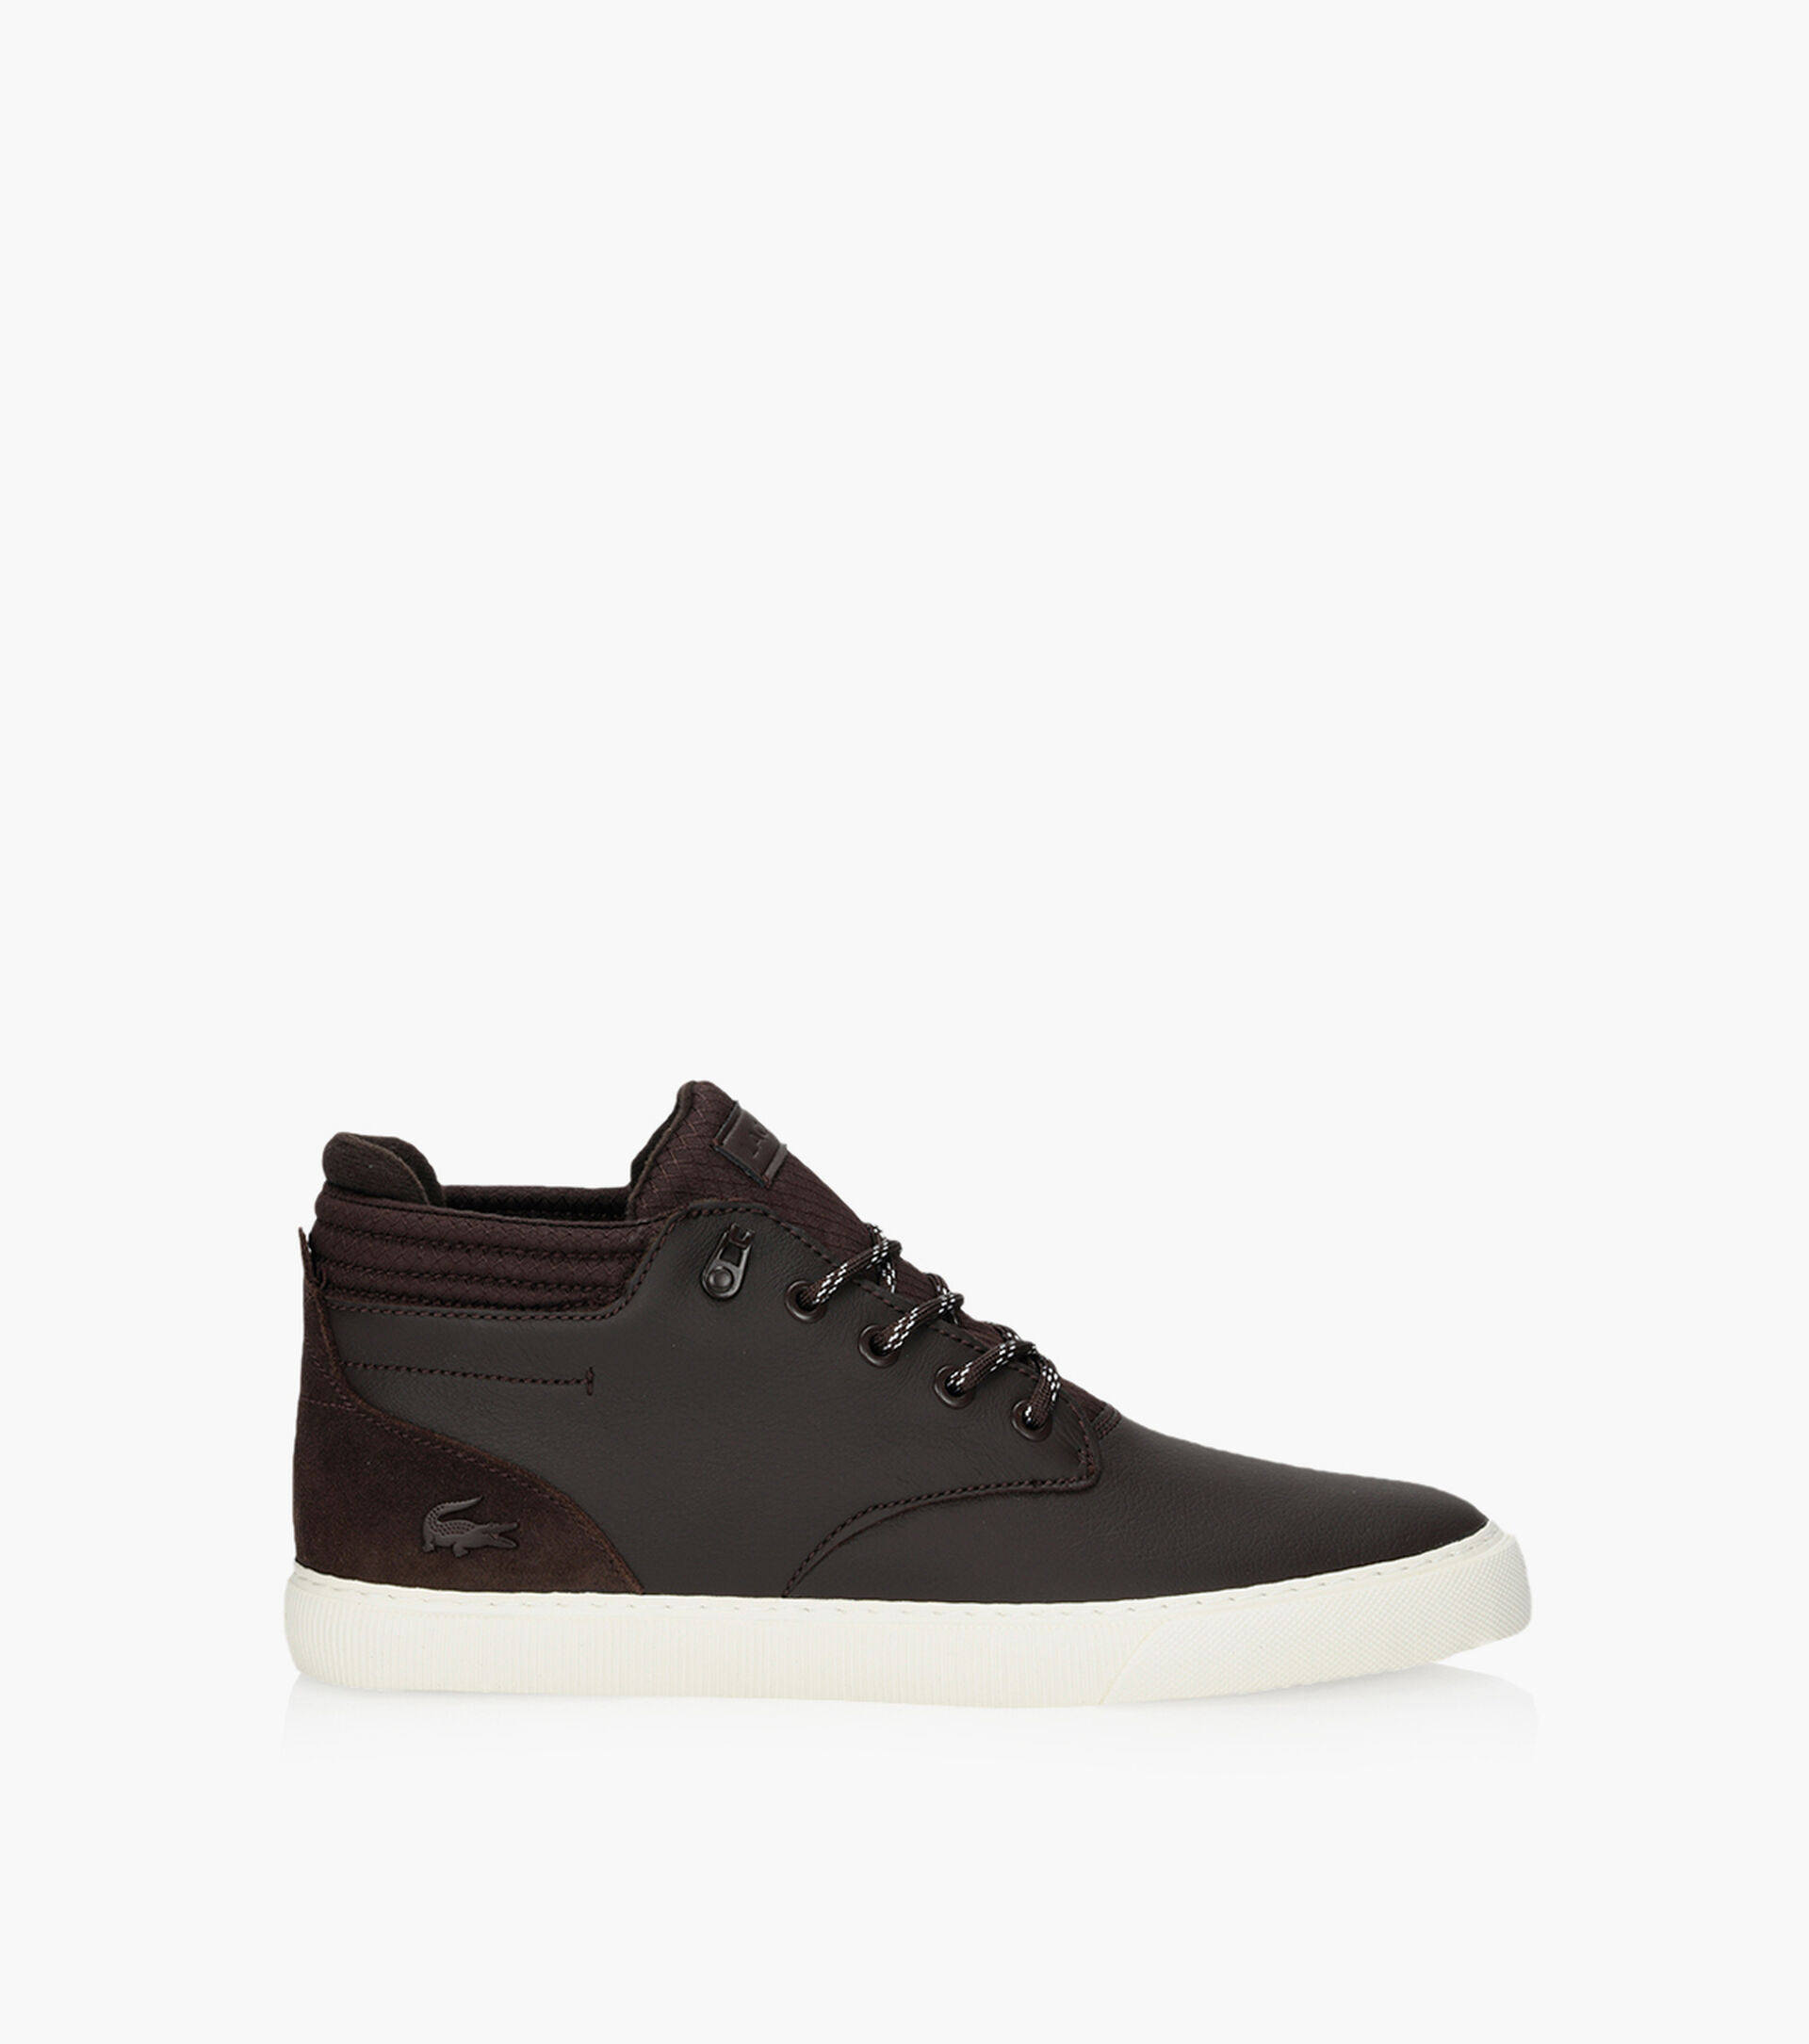 LACOSTE ESPARRE CHUKKA 0320 - Leather | Browns Shoes